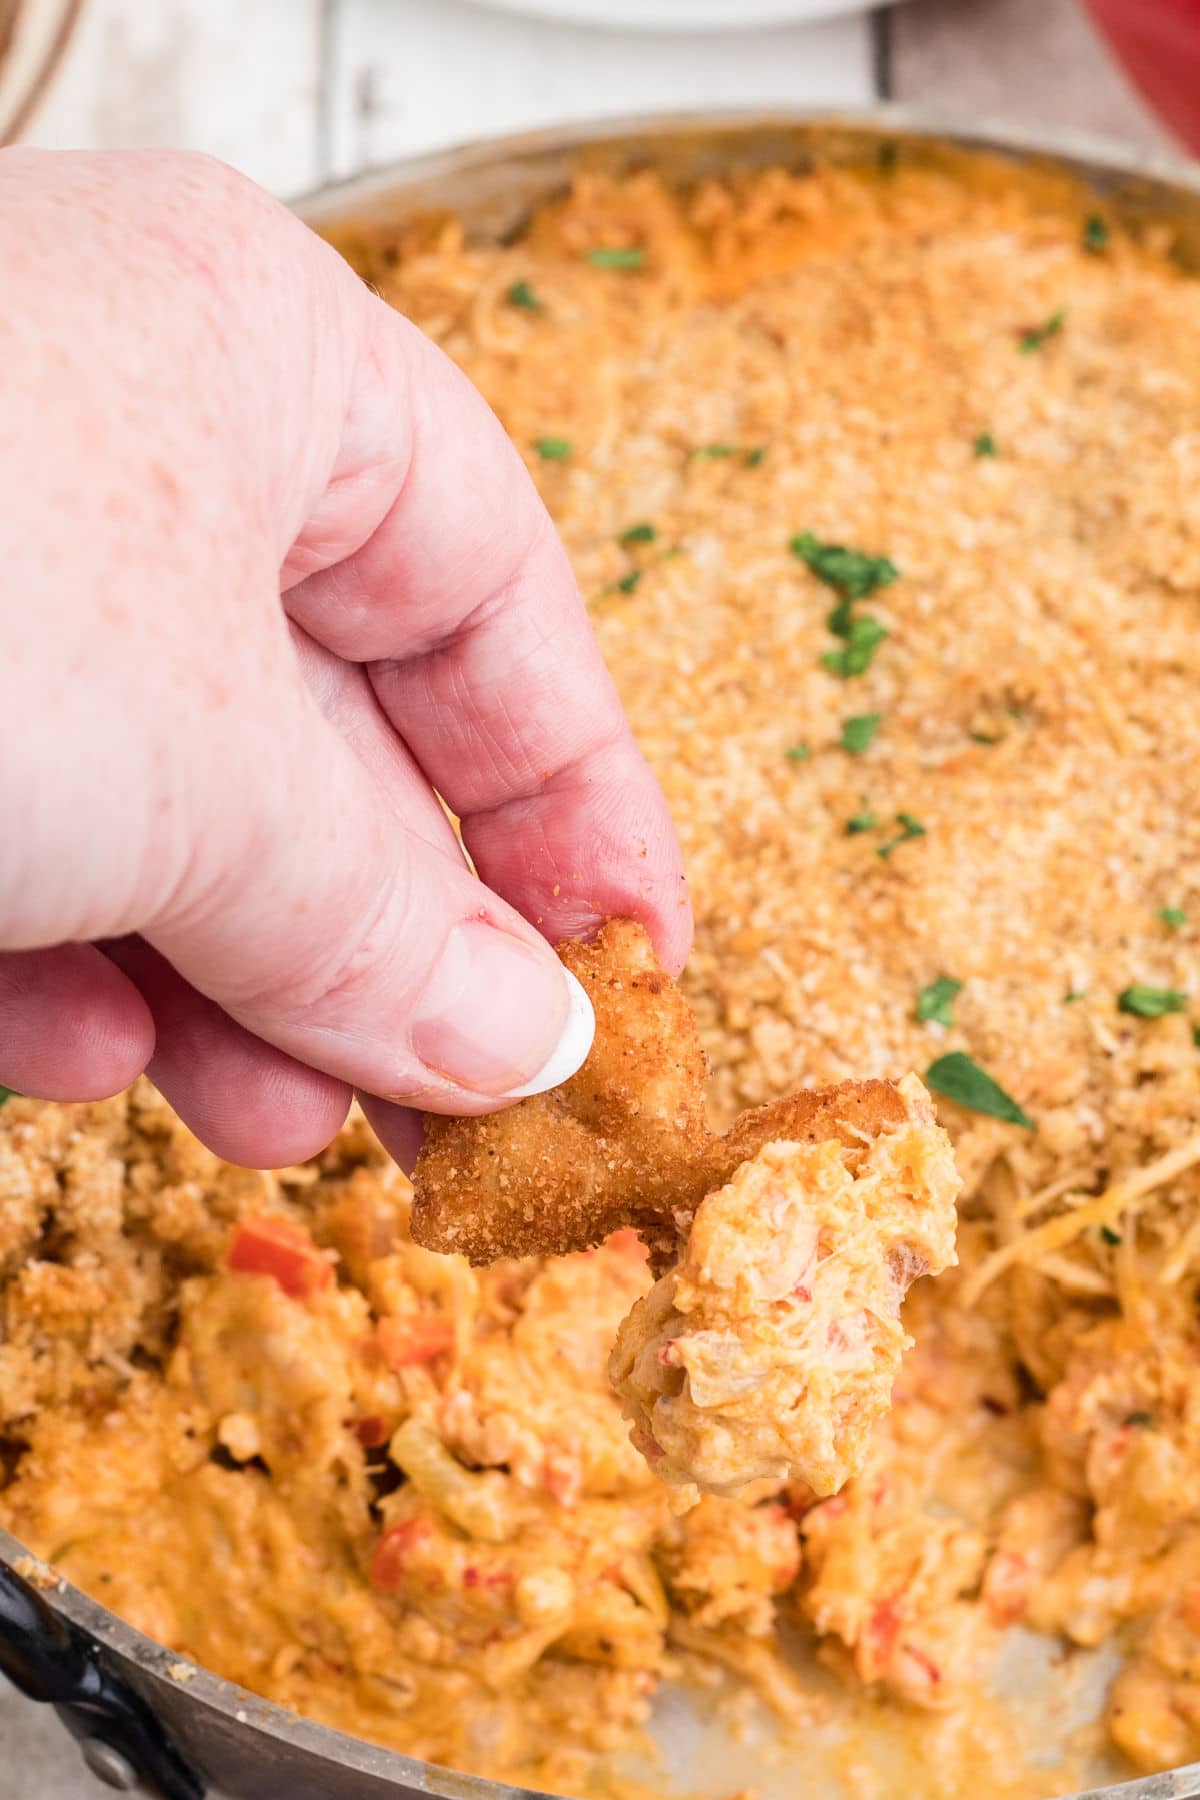 a close up picture of a hand dipping a fried bowtie pasta chip into crawfish dip